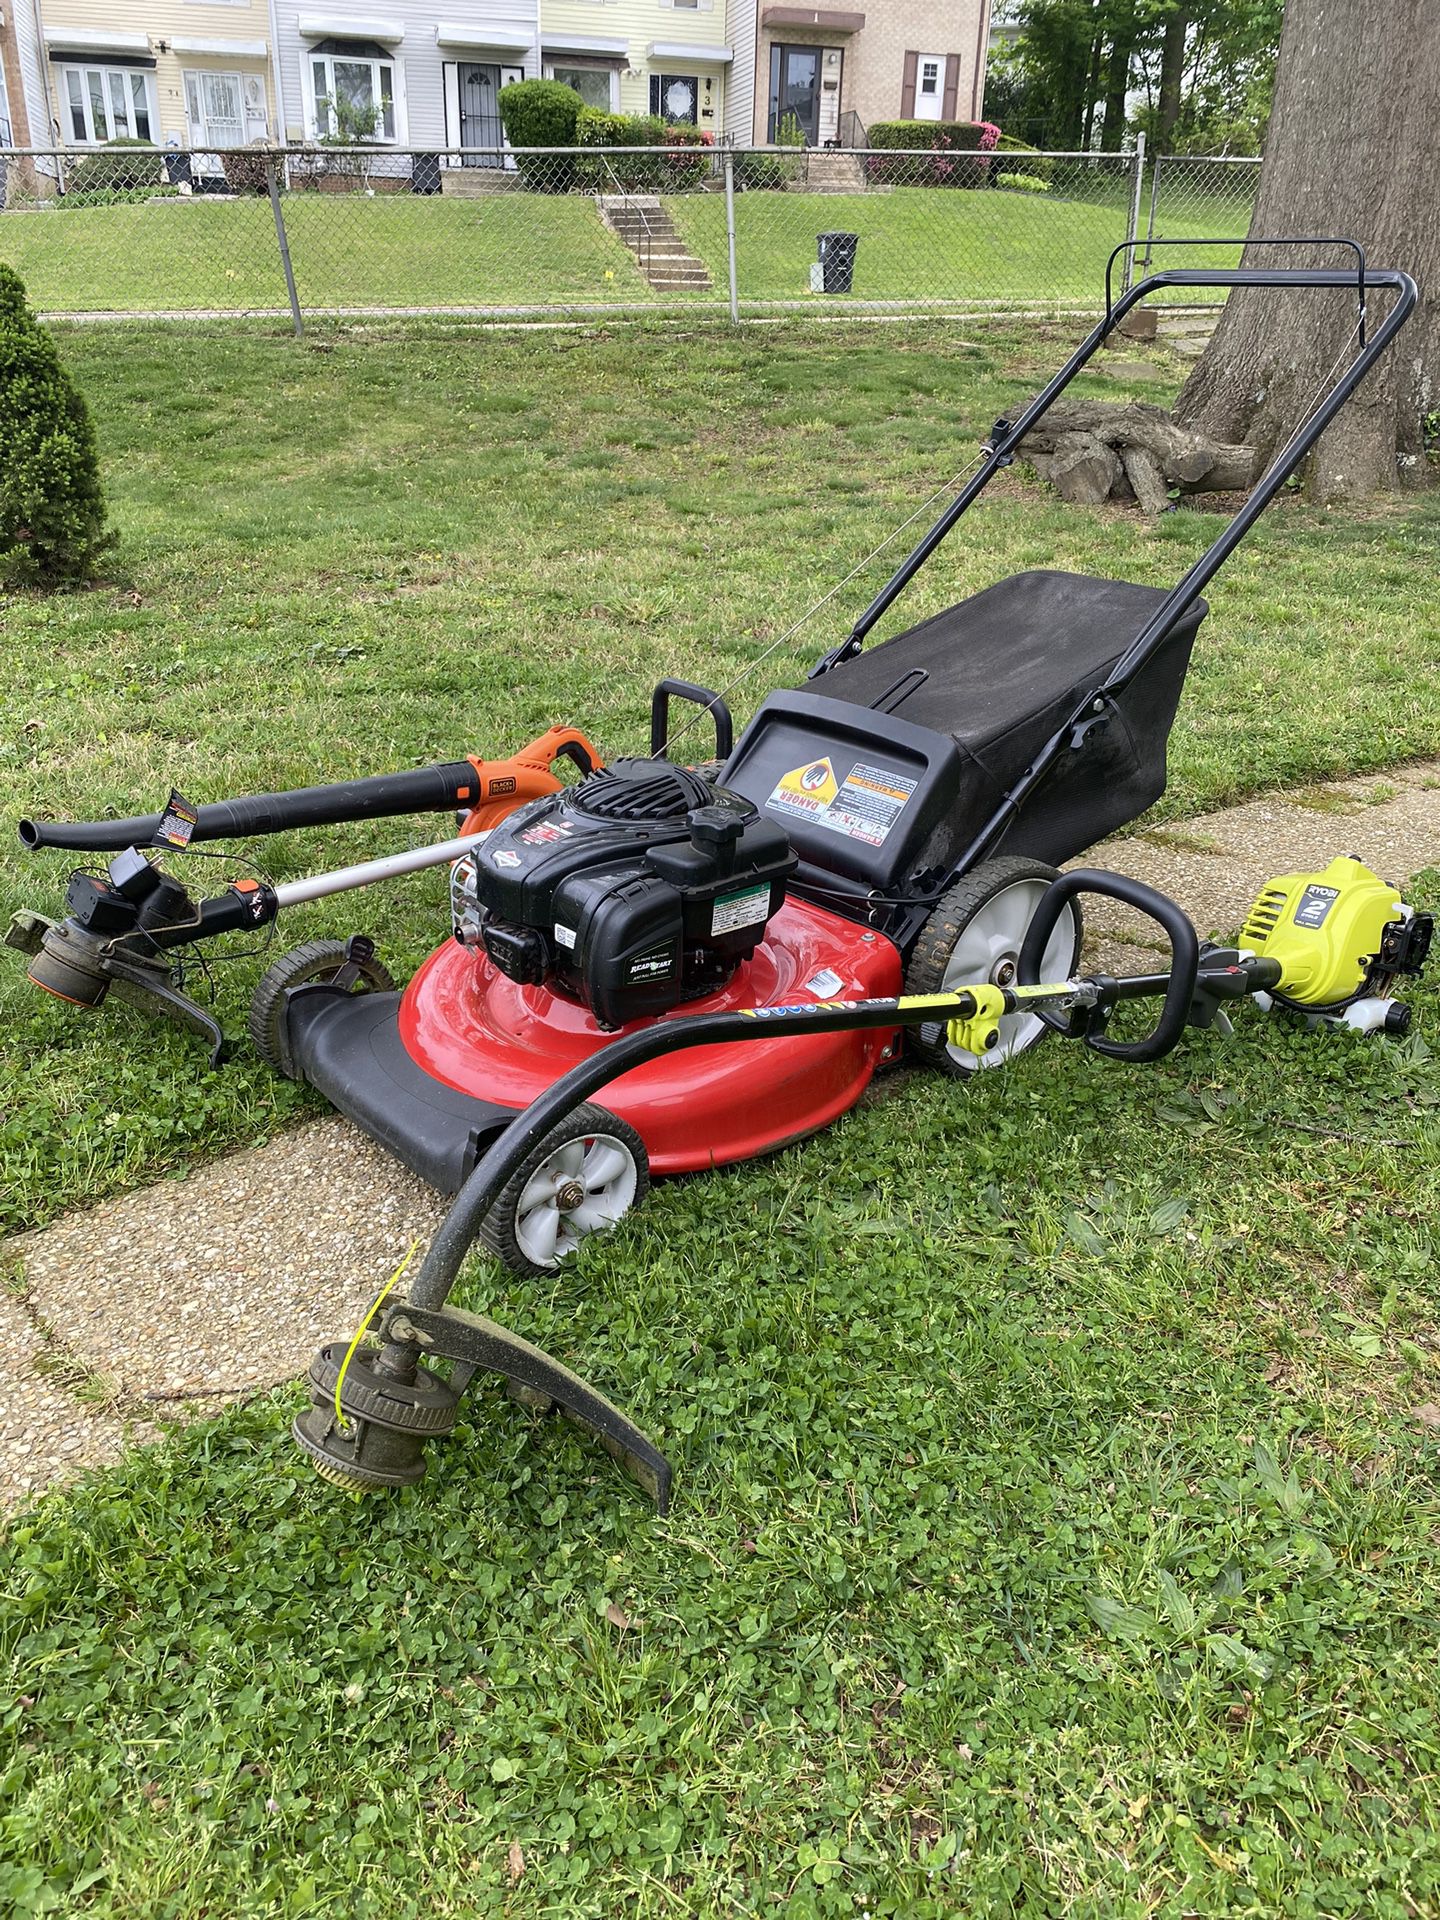 YardMachine Push Mower With Bag, Black+Decker Wacker And Blower With 40v Battery With Charger, Ryobi 2 Cycle Curve Wacker! Everything Works Great!